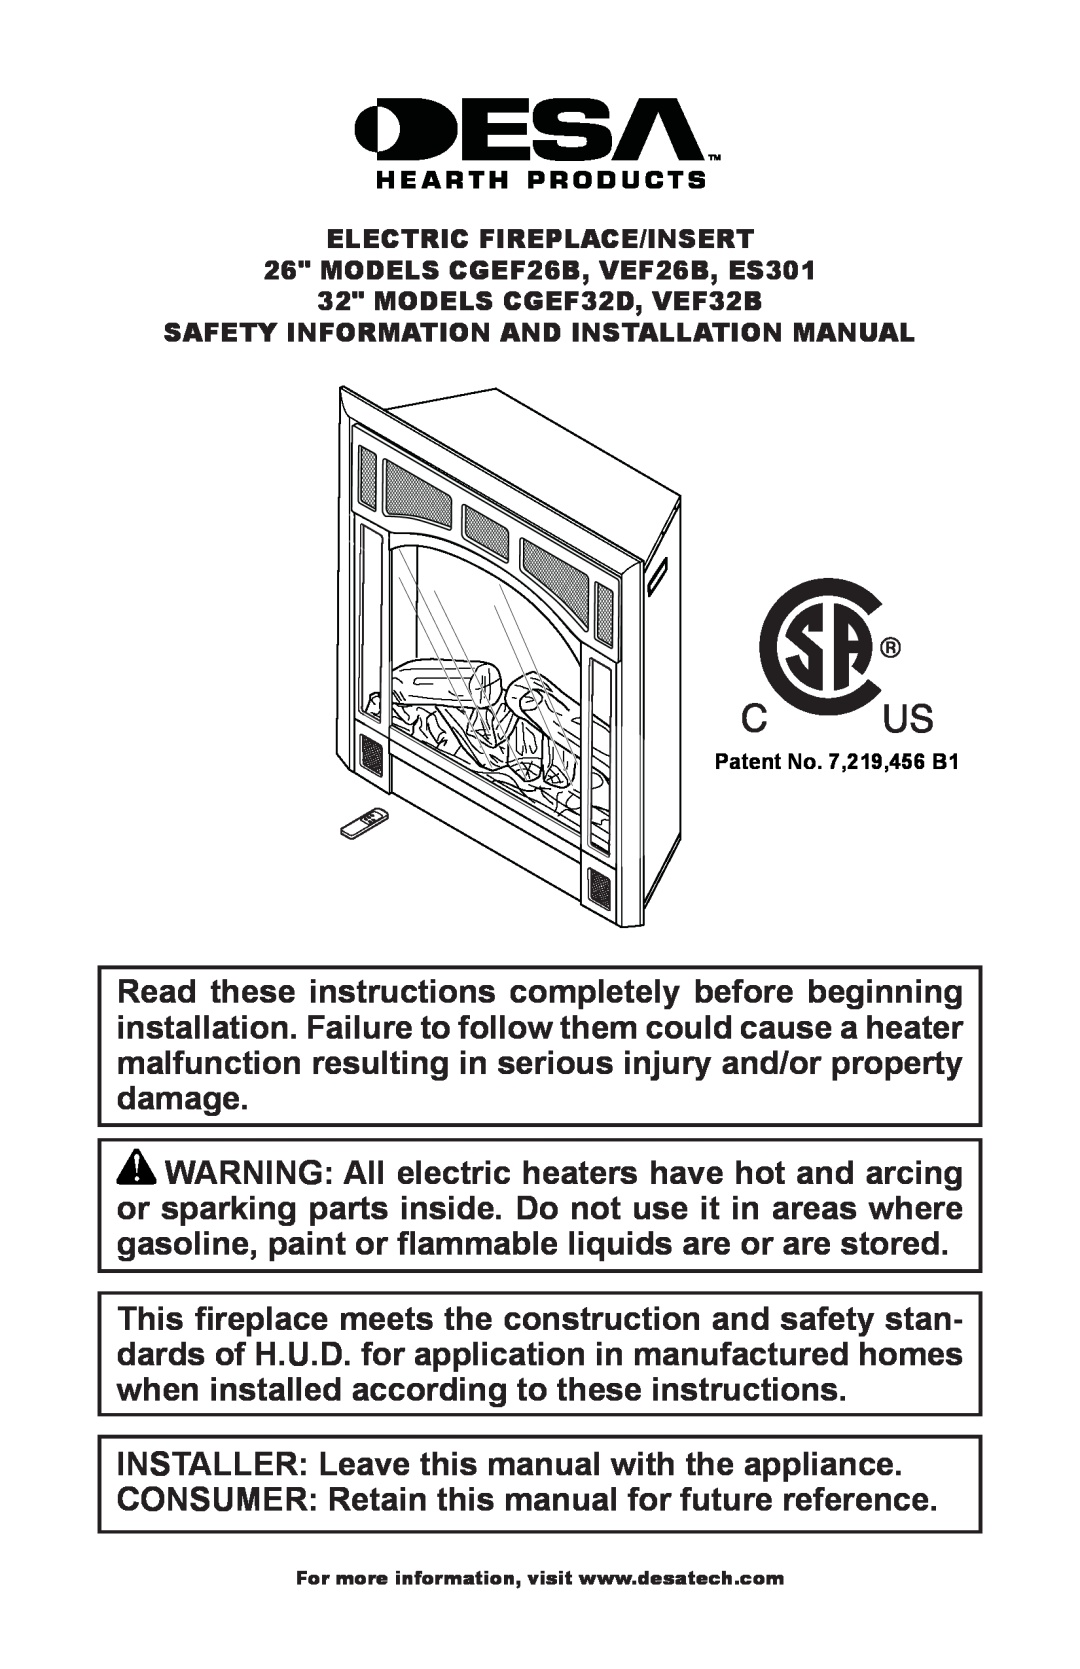 Desa CGEF26B, ES301, CGEF32D, VEF26B, VEF32B installation manual INSTALLER Leave this manual with the appliance 